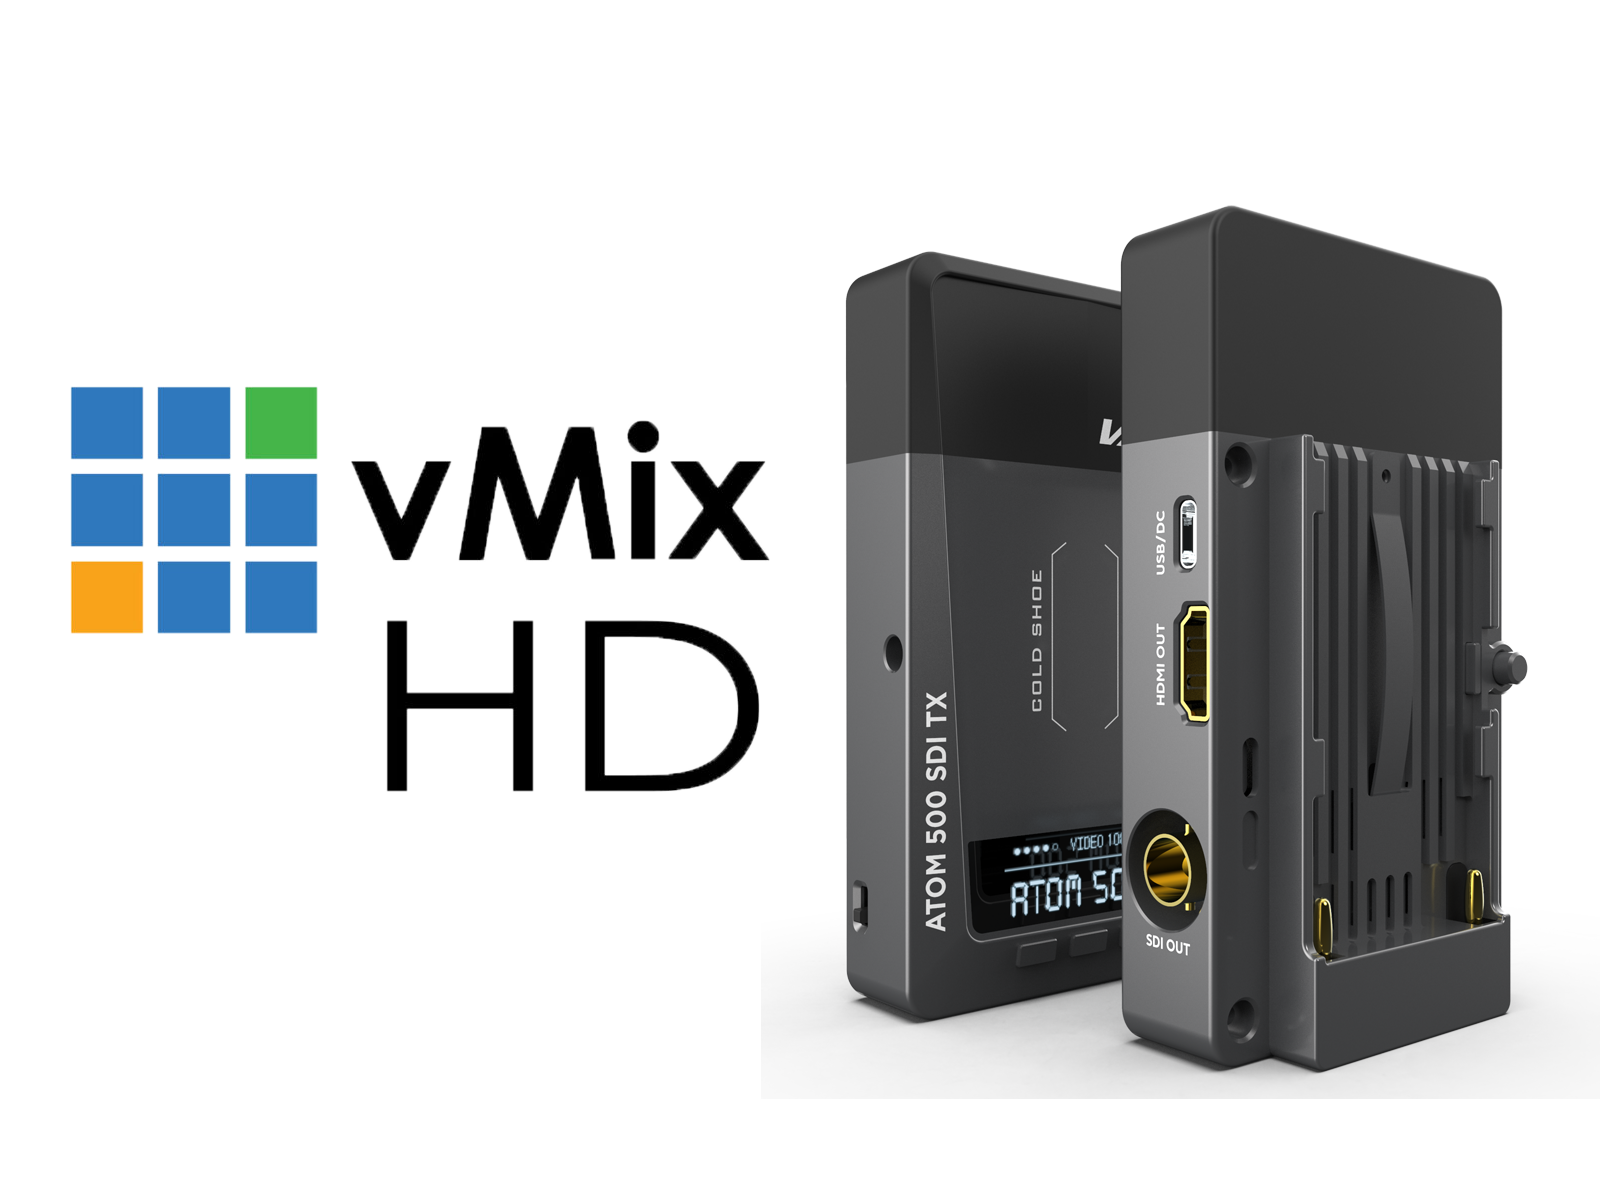 Vaxis ATOM 500 Wireless TX/RX Kit with vMix Basic HD - US BROADCAST